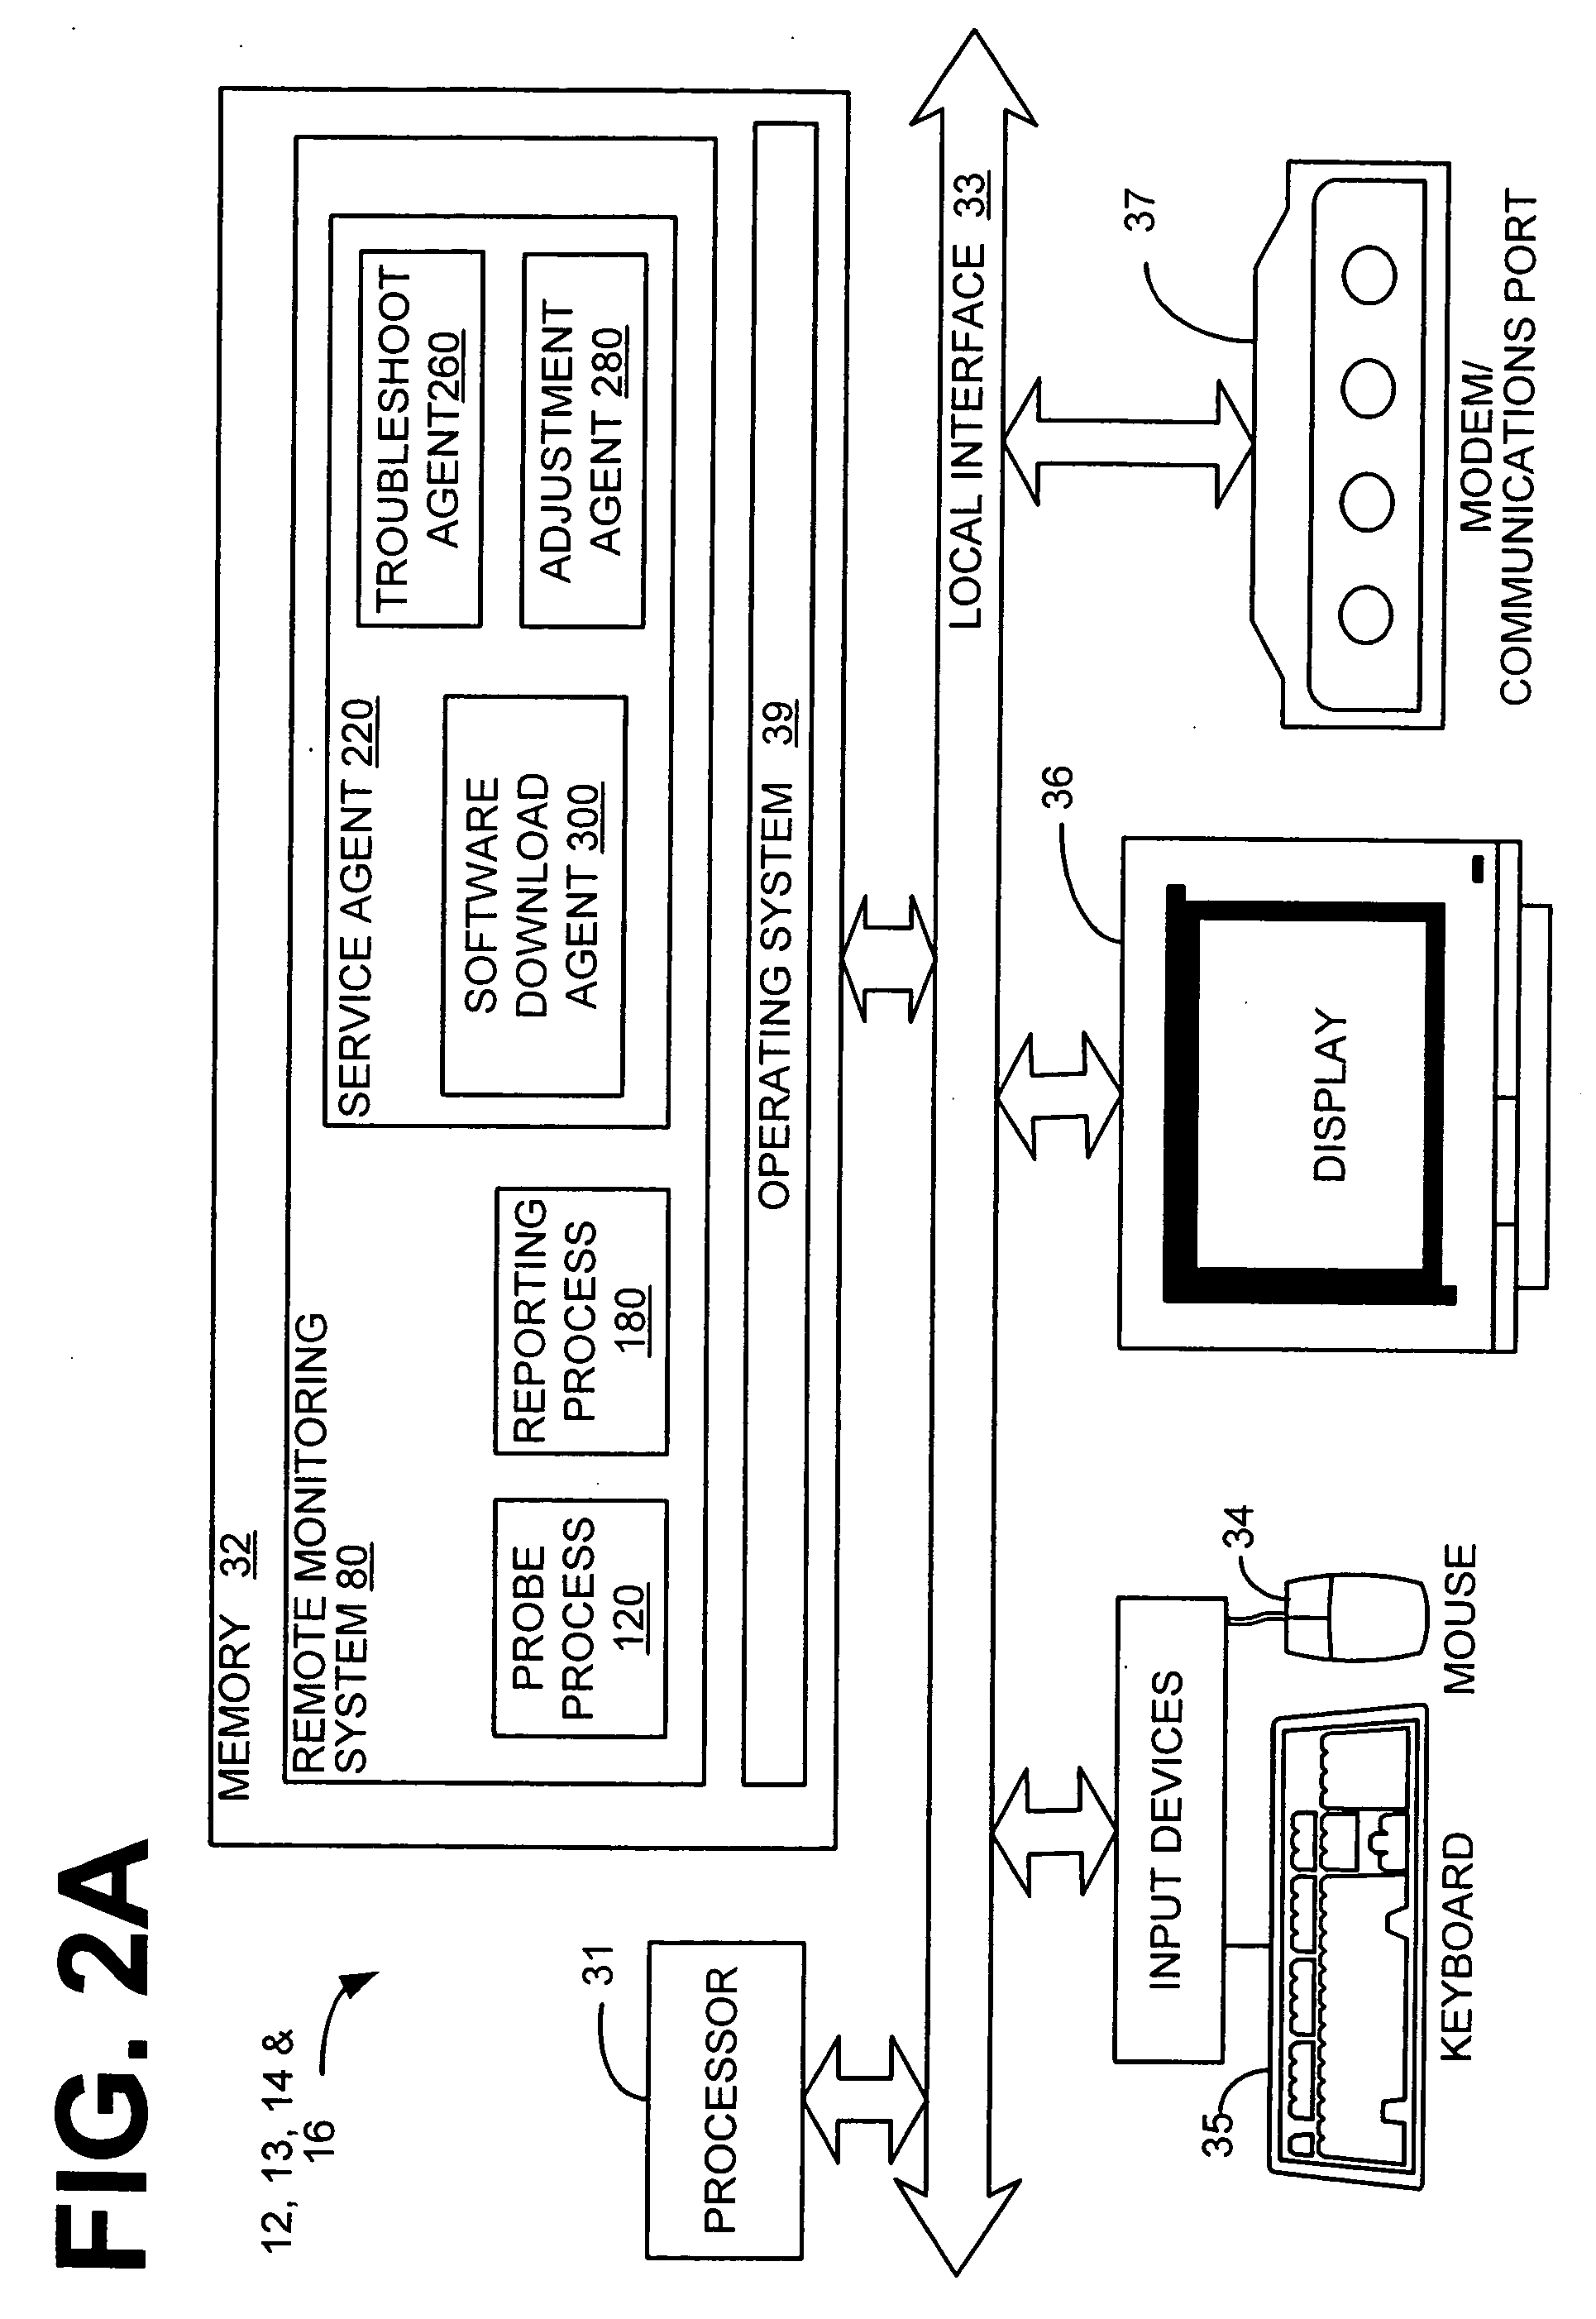 Operational control system and a system providing for remote monitoring of a manufacturing device